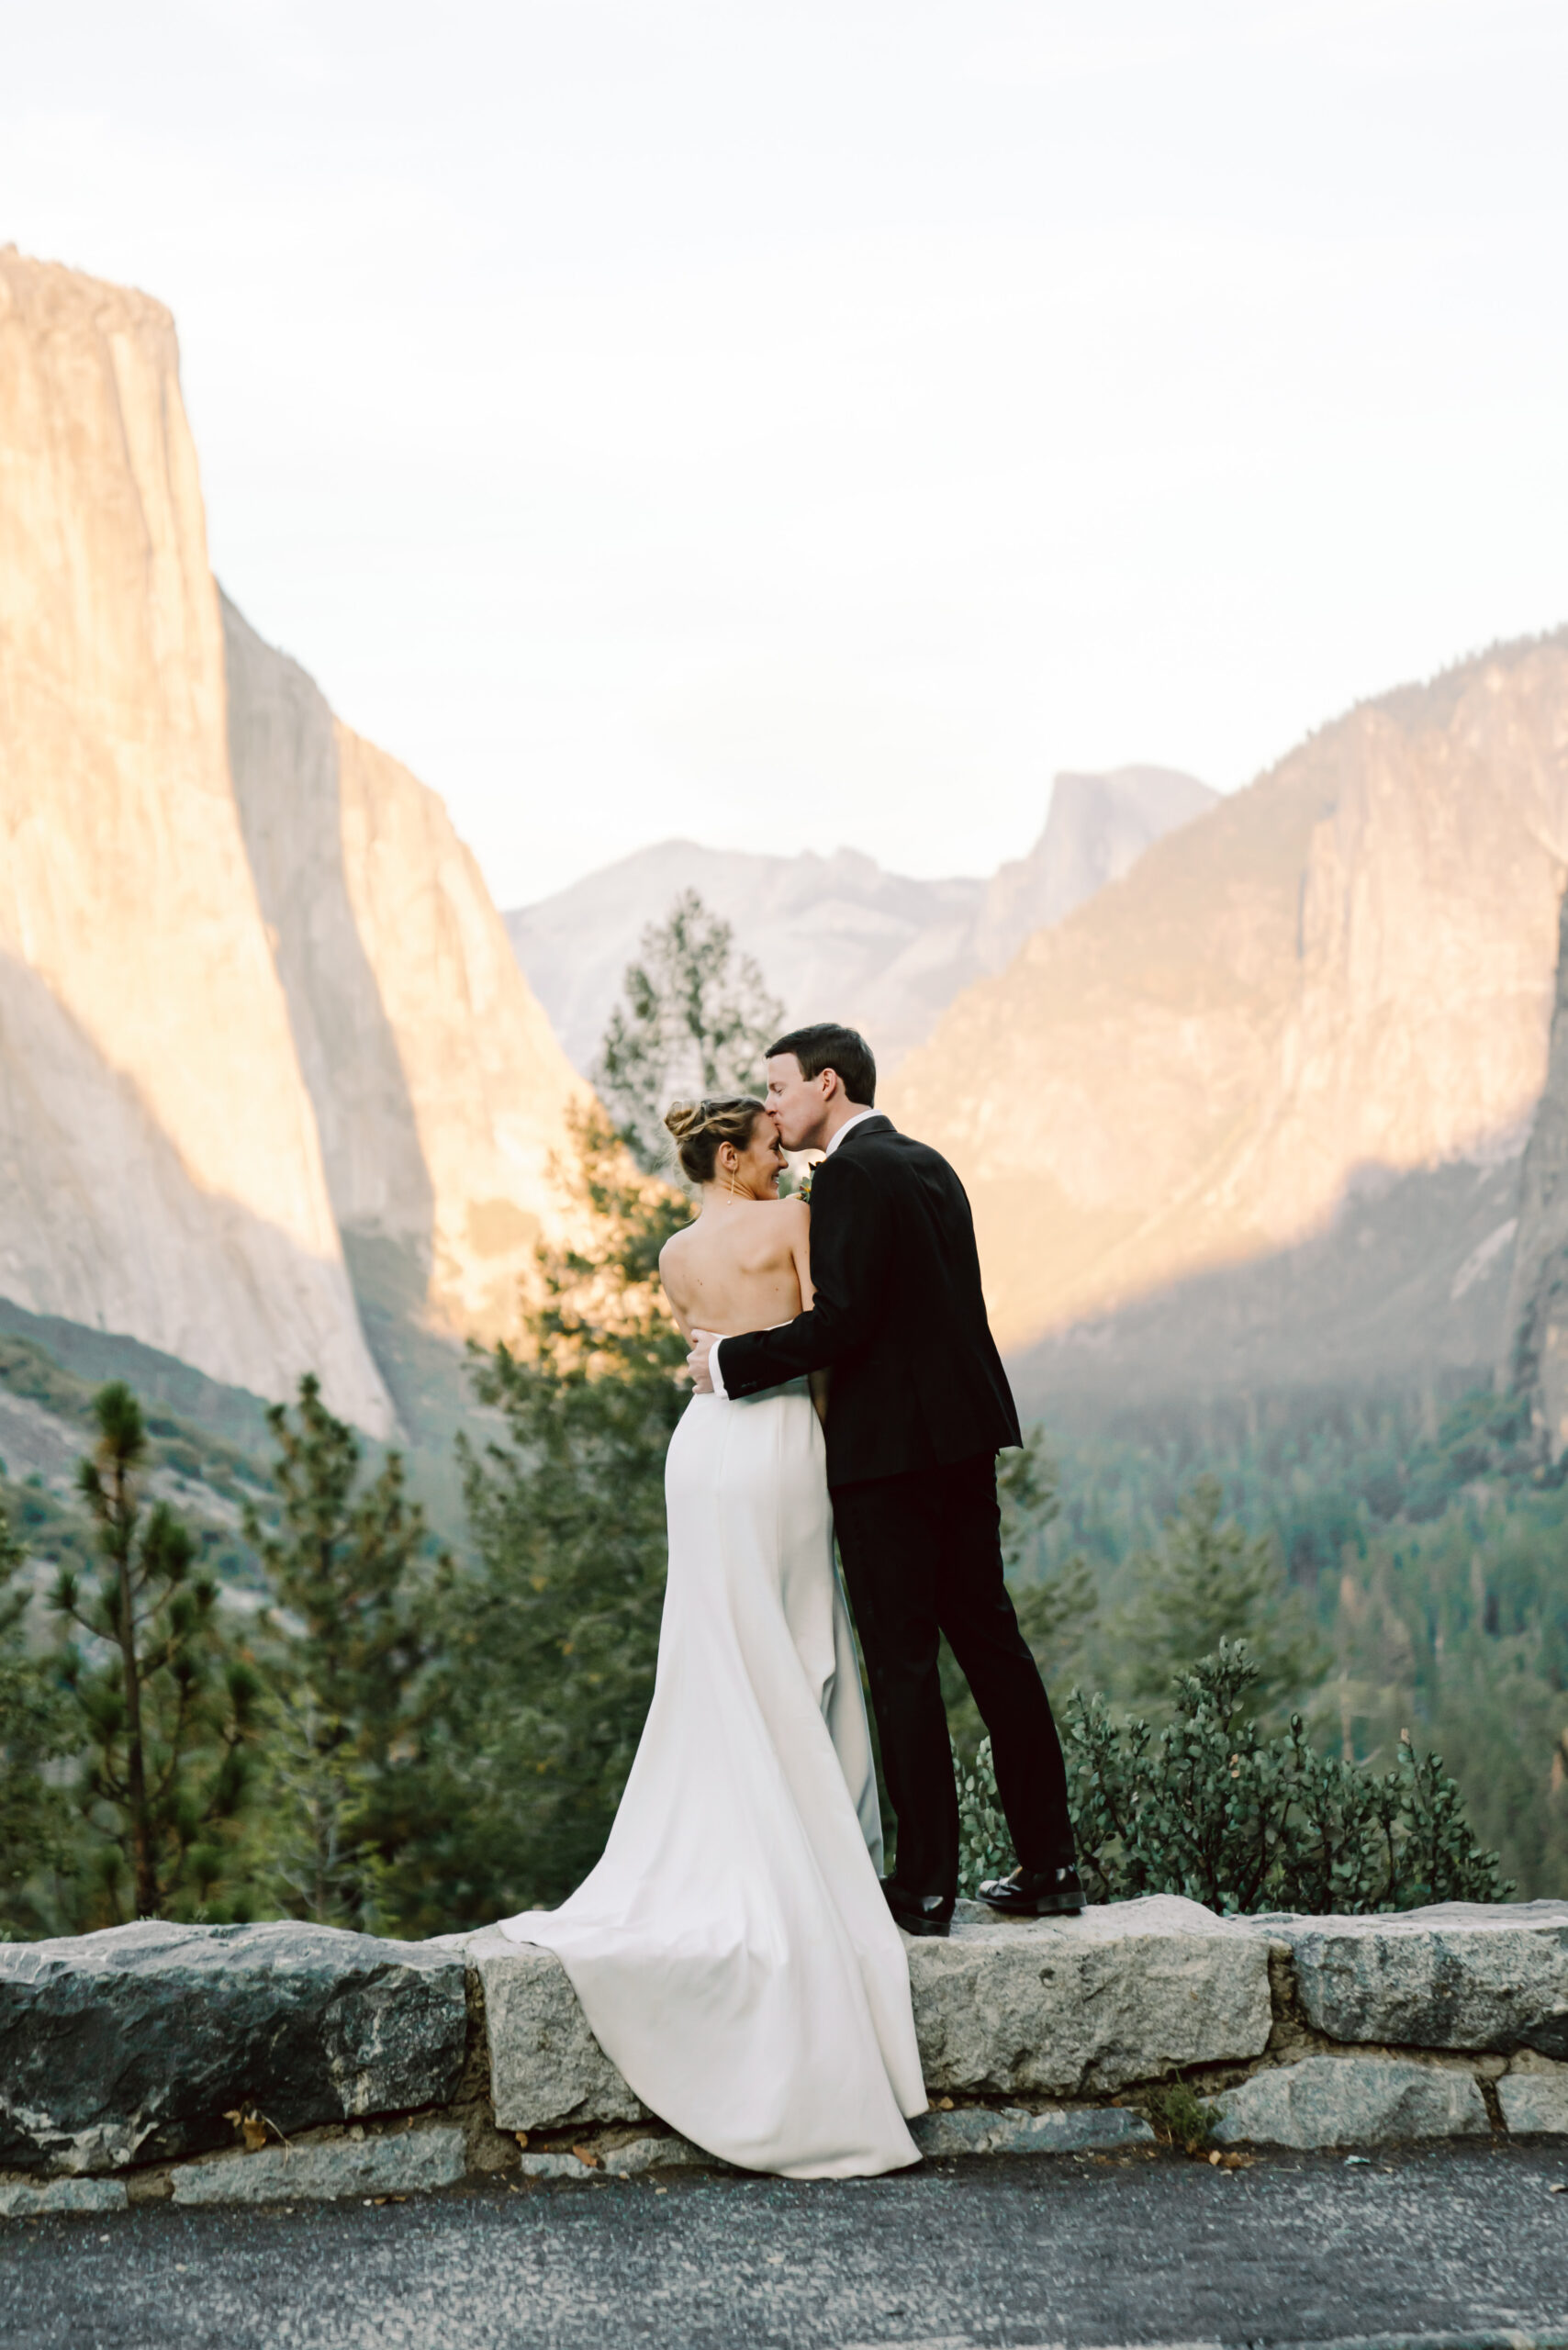 A groom kissing his bride surrounding by the mountains on their elopement day